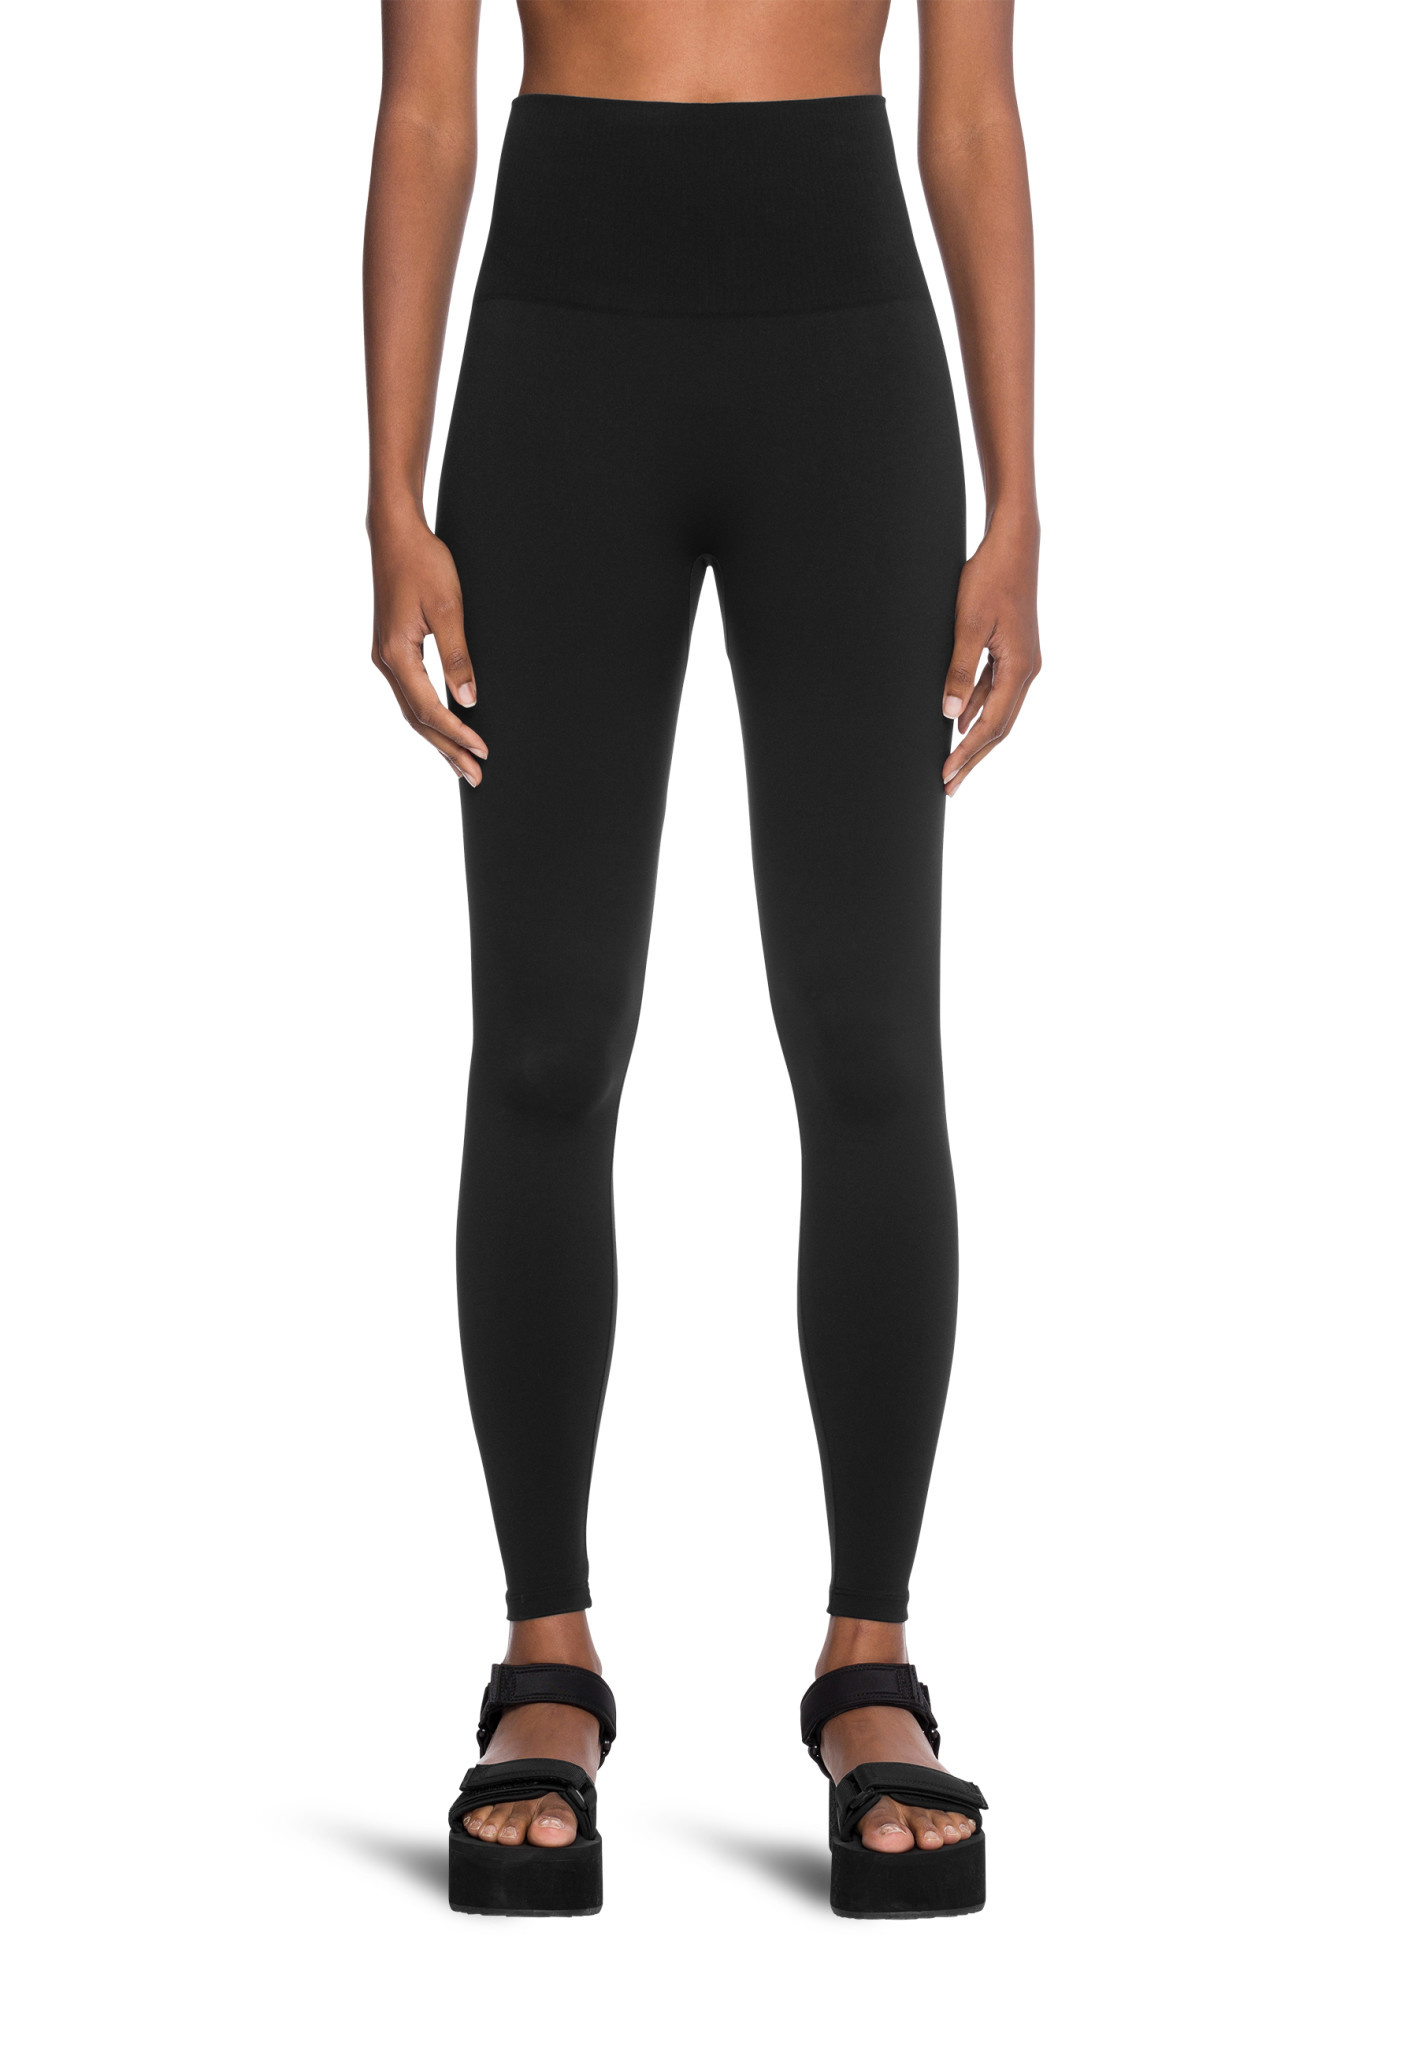 WOLFORD PERFECT FIT LEGGINGS in BLACK